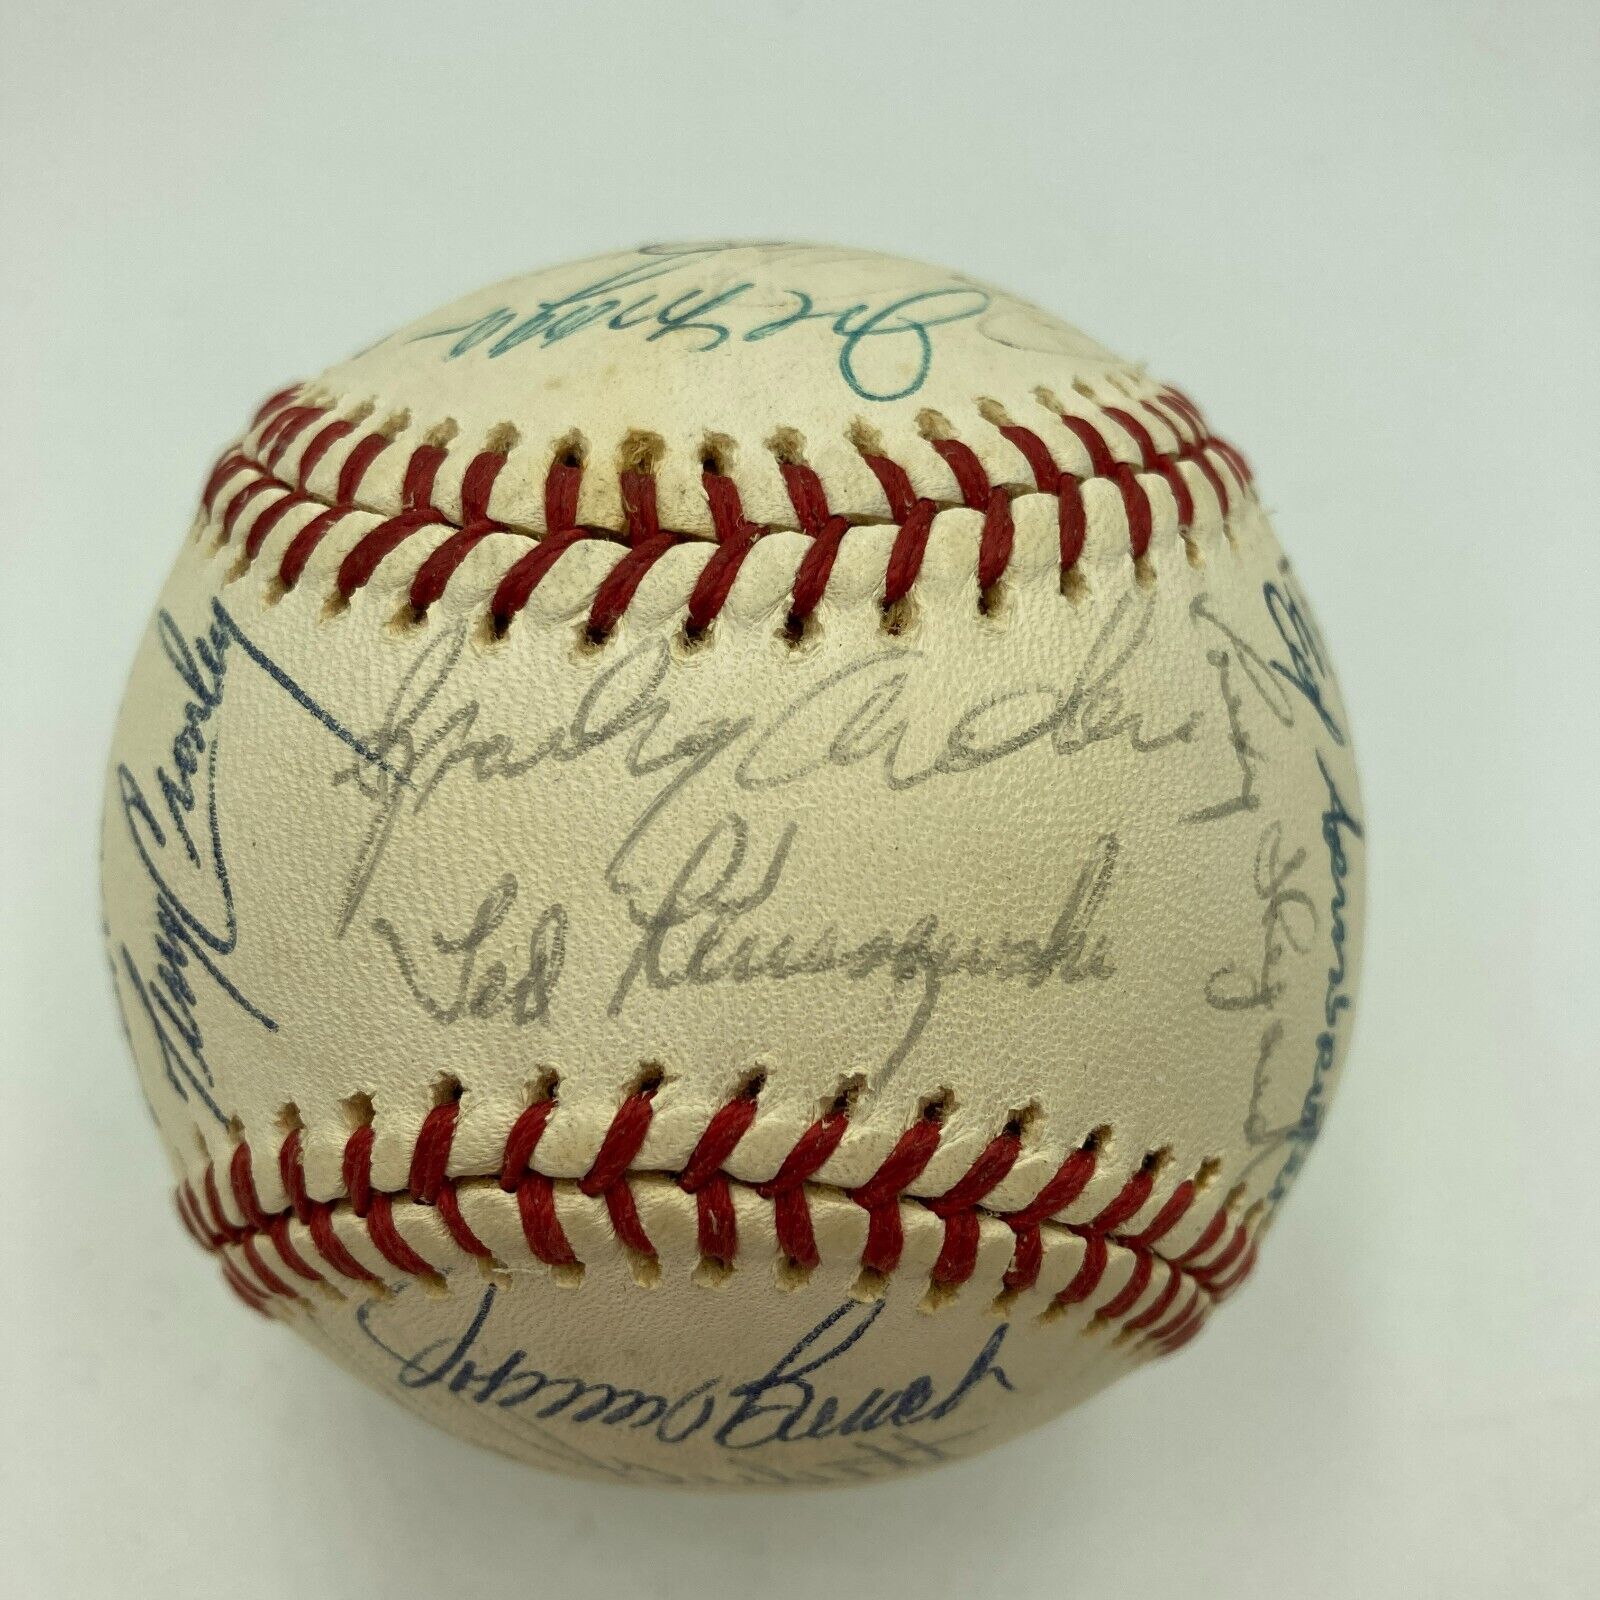 1975 World Series Champion Cincinnati Reds Team Signed Autographed Official  Spalding NL Baseball With 28 Signatures Including Johnny Bench (No